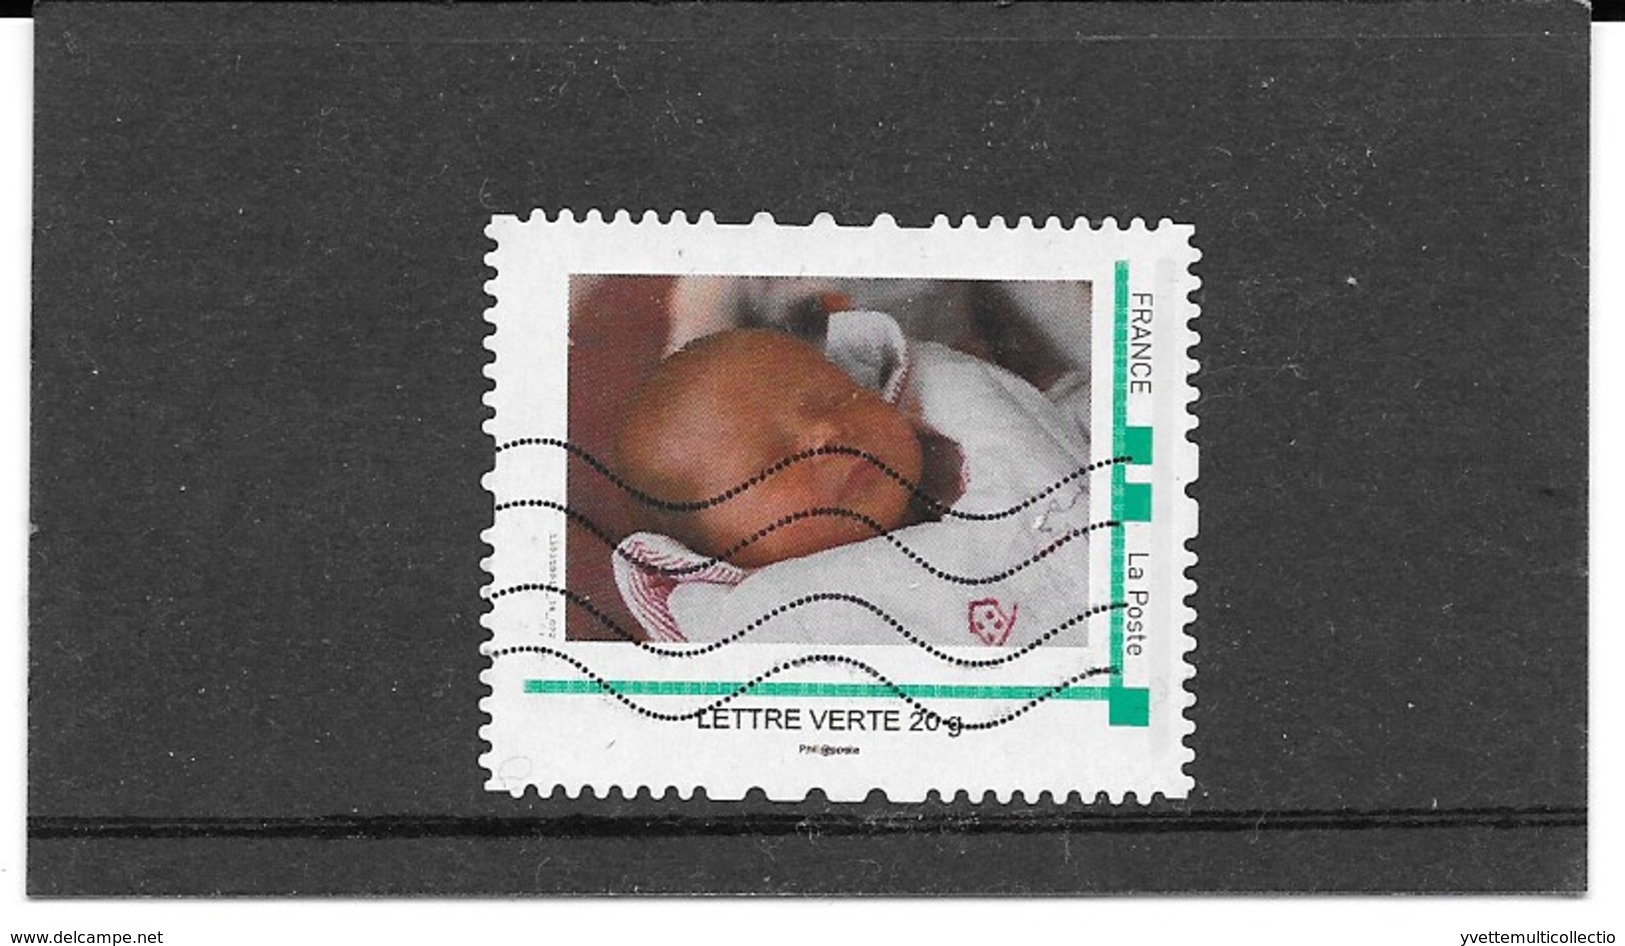 FRANCE.TIMBRE COLLECTOR MONTIMBRAMOI PERSONNALISE OBLITERE " NAISSANCE ".MONTIMBRAMOI. LETTRE VERTE 20 G - Usati